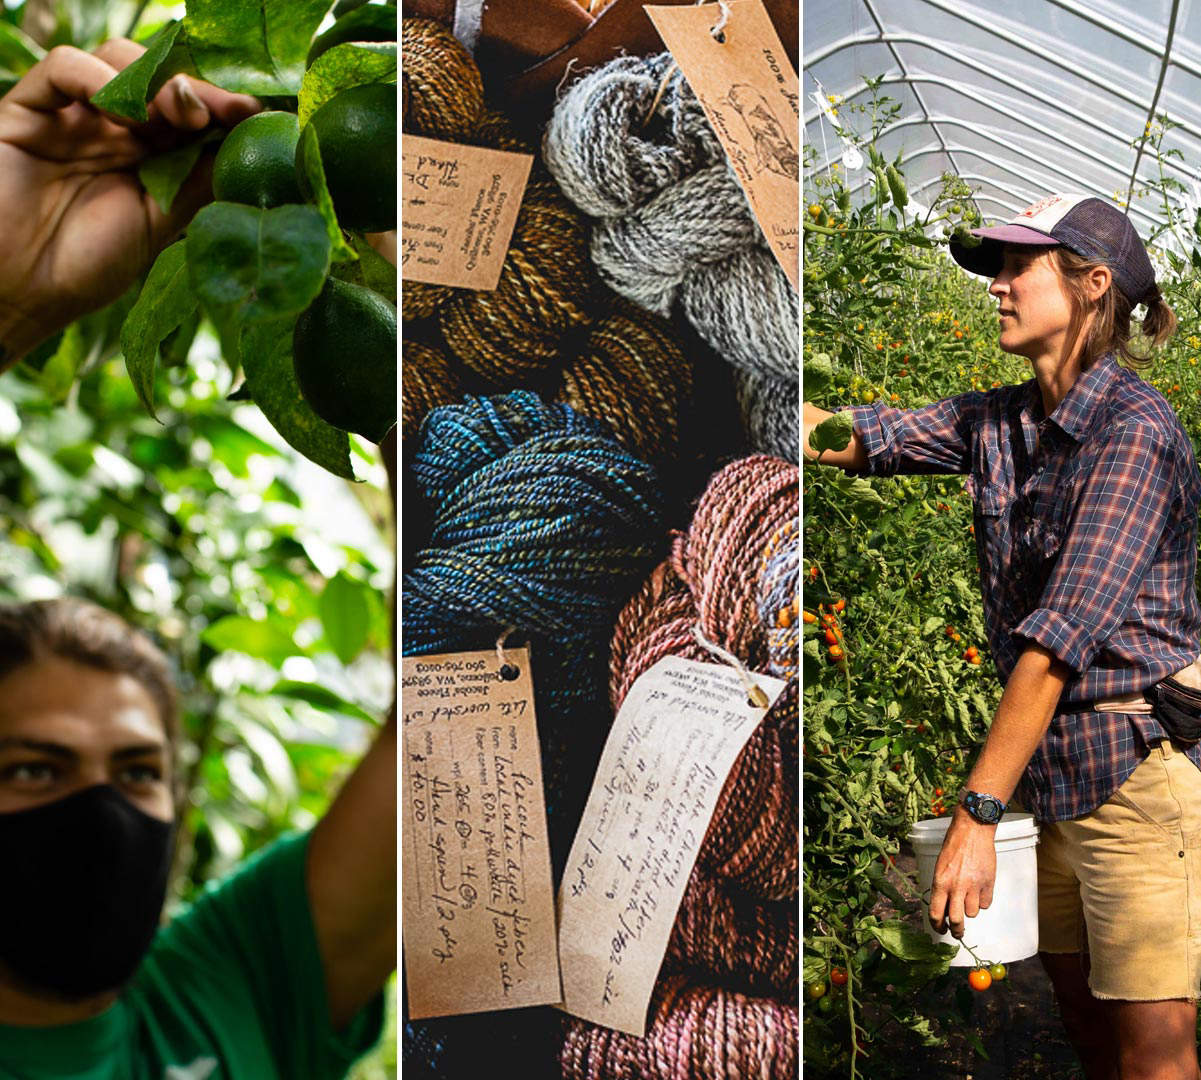 A trio of photos showing a man pruning, a collection of wool yarn, and a woman harvesting tomatoes in a greenhouse